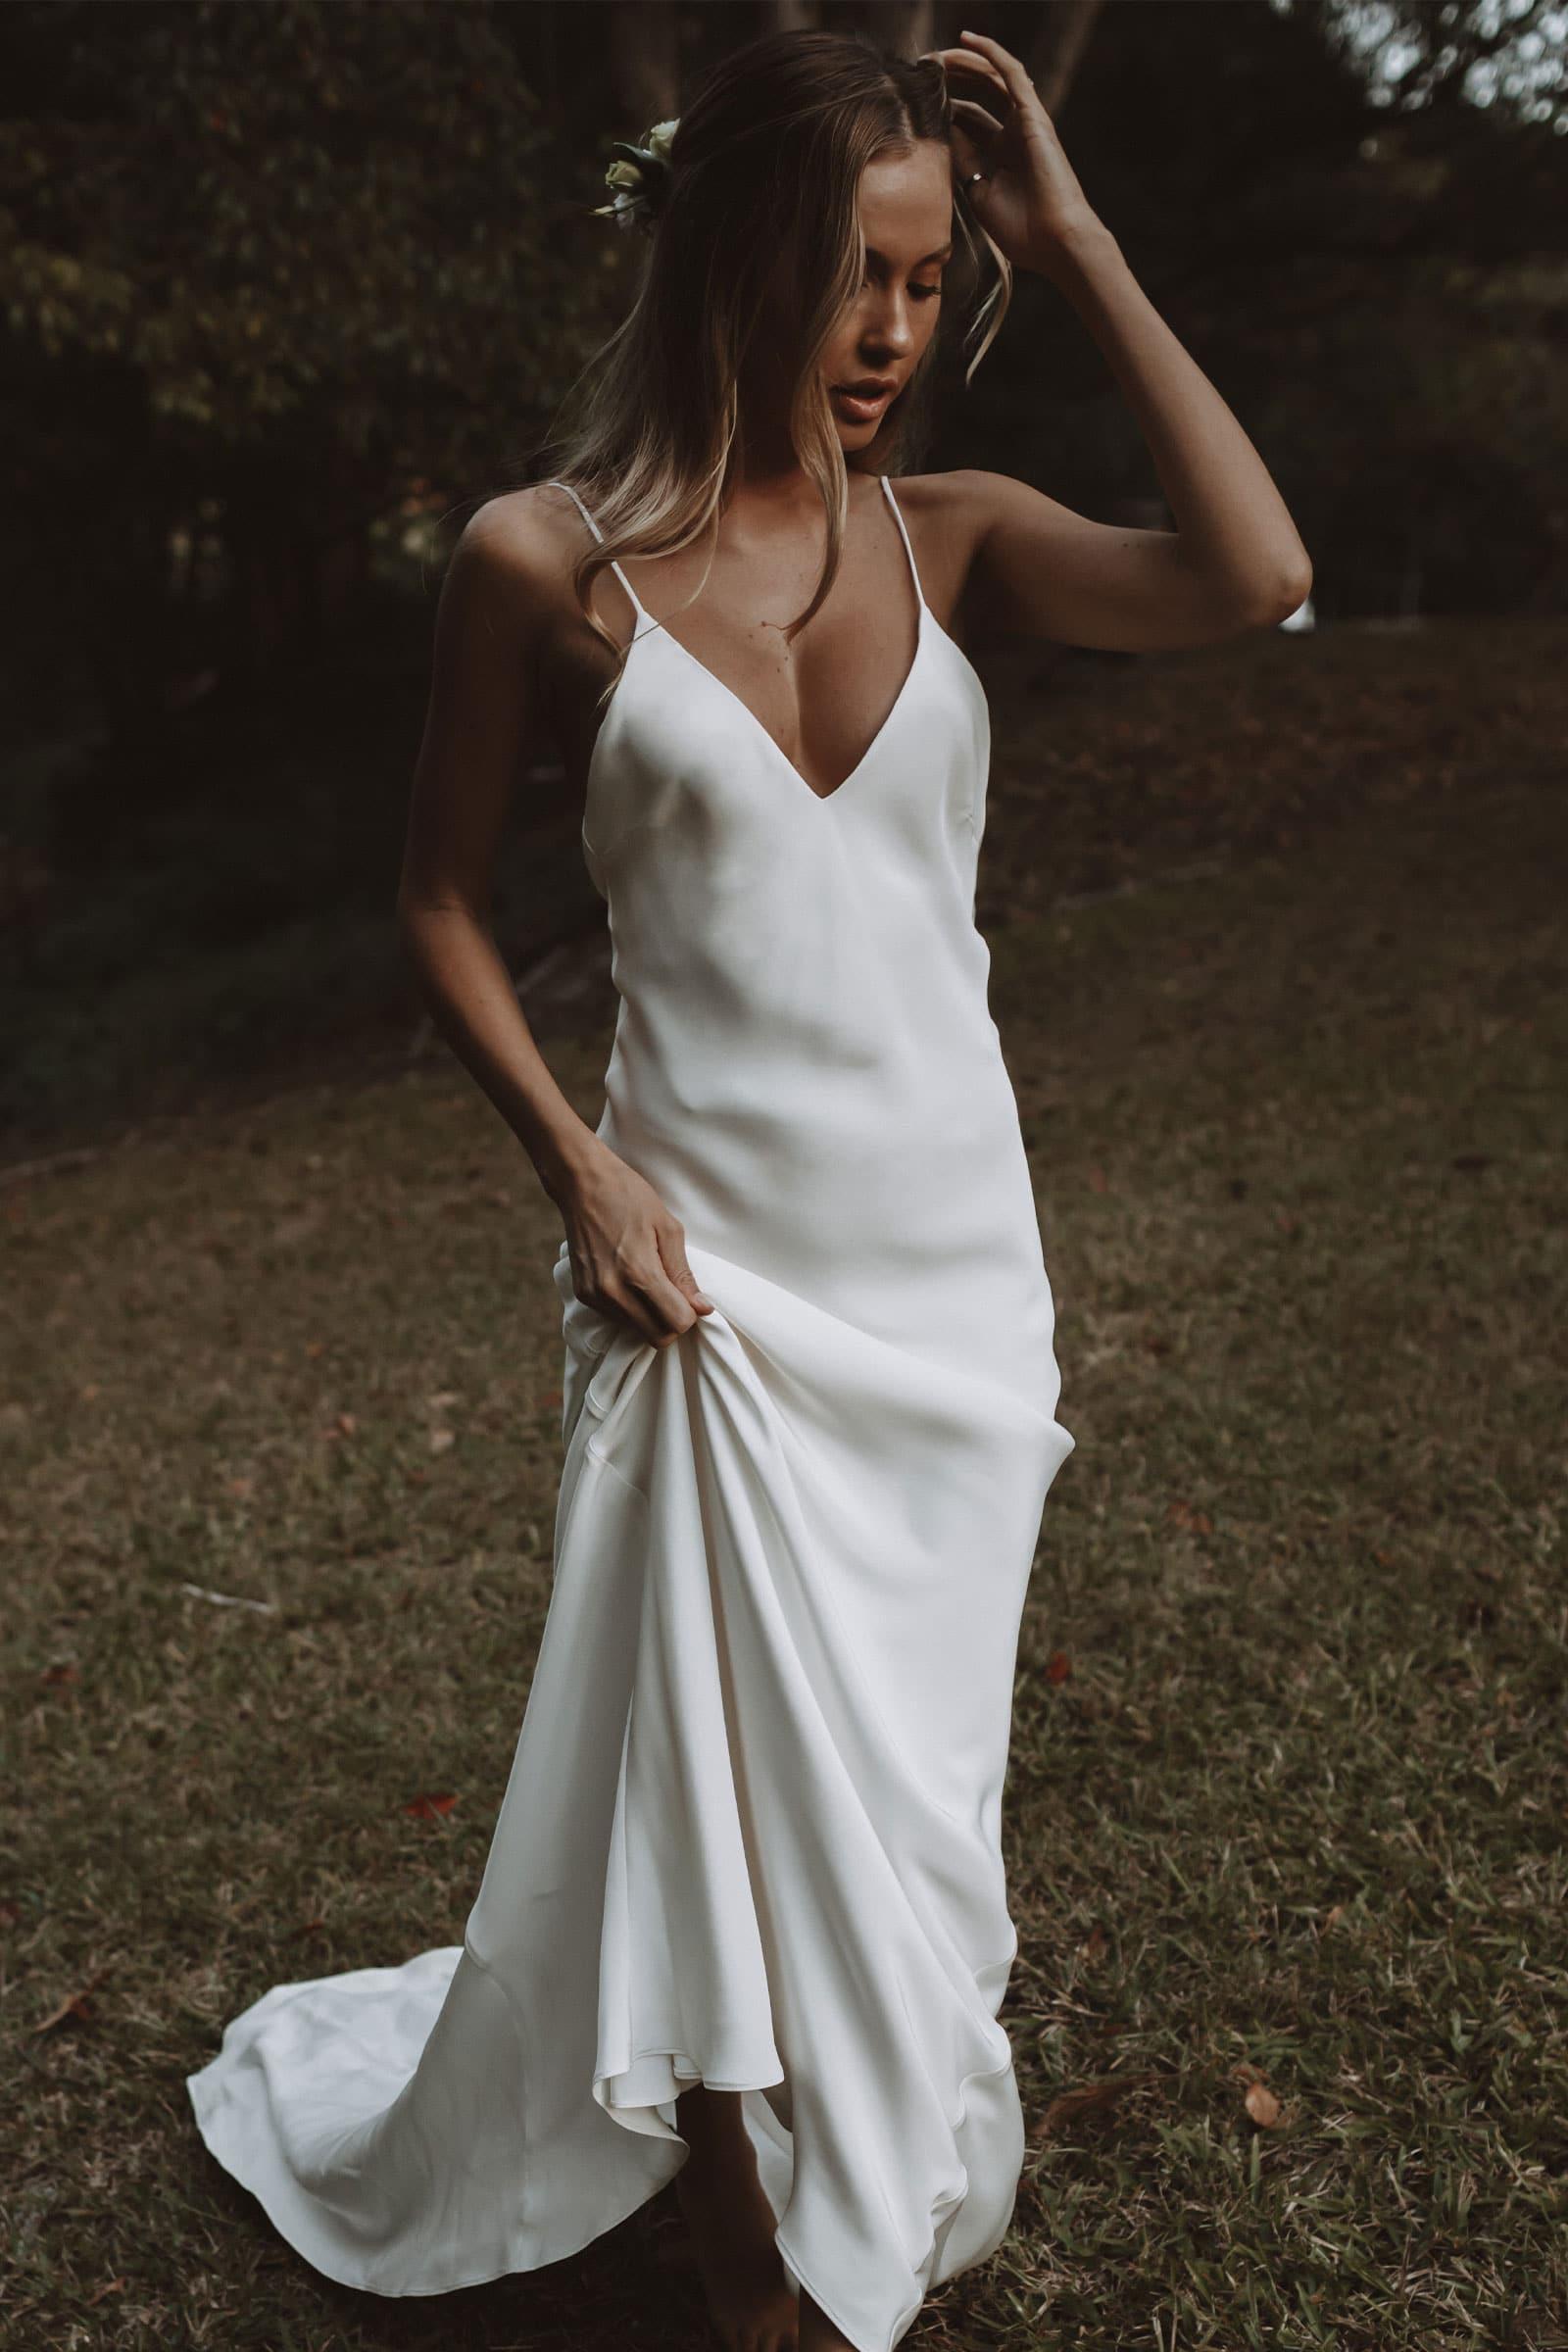 39 Beautiful Beach Wedding Dresses for 2021 - hitched.co.uk - hitched.co.uk